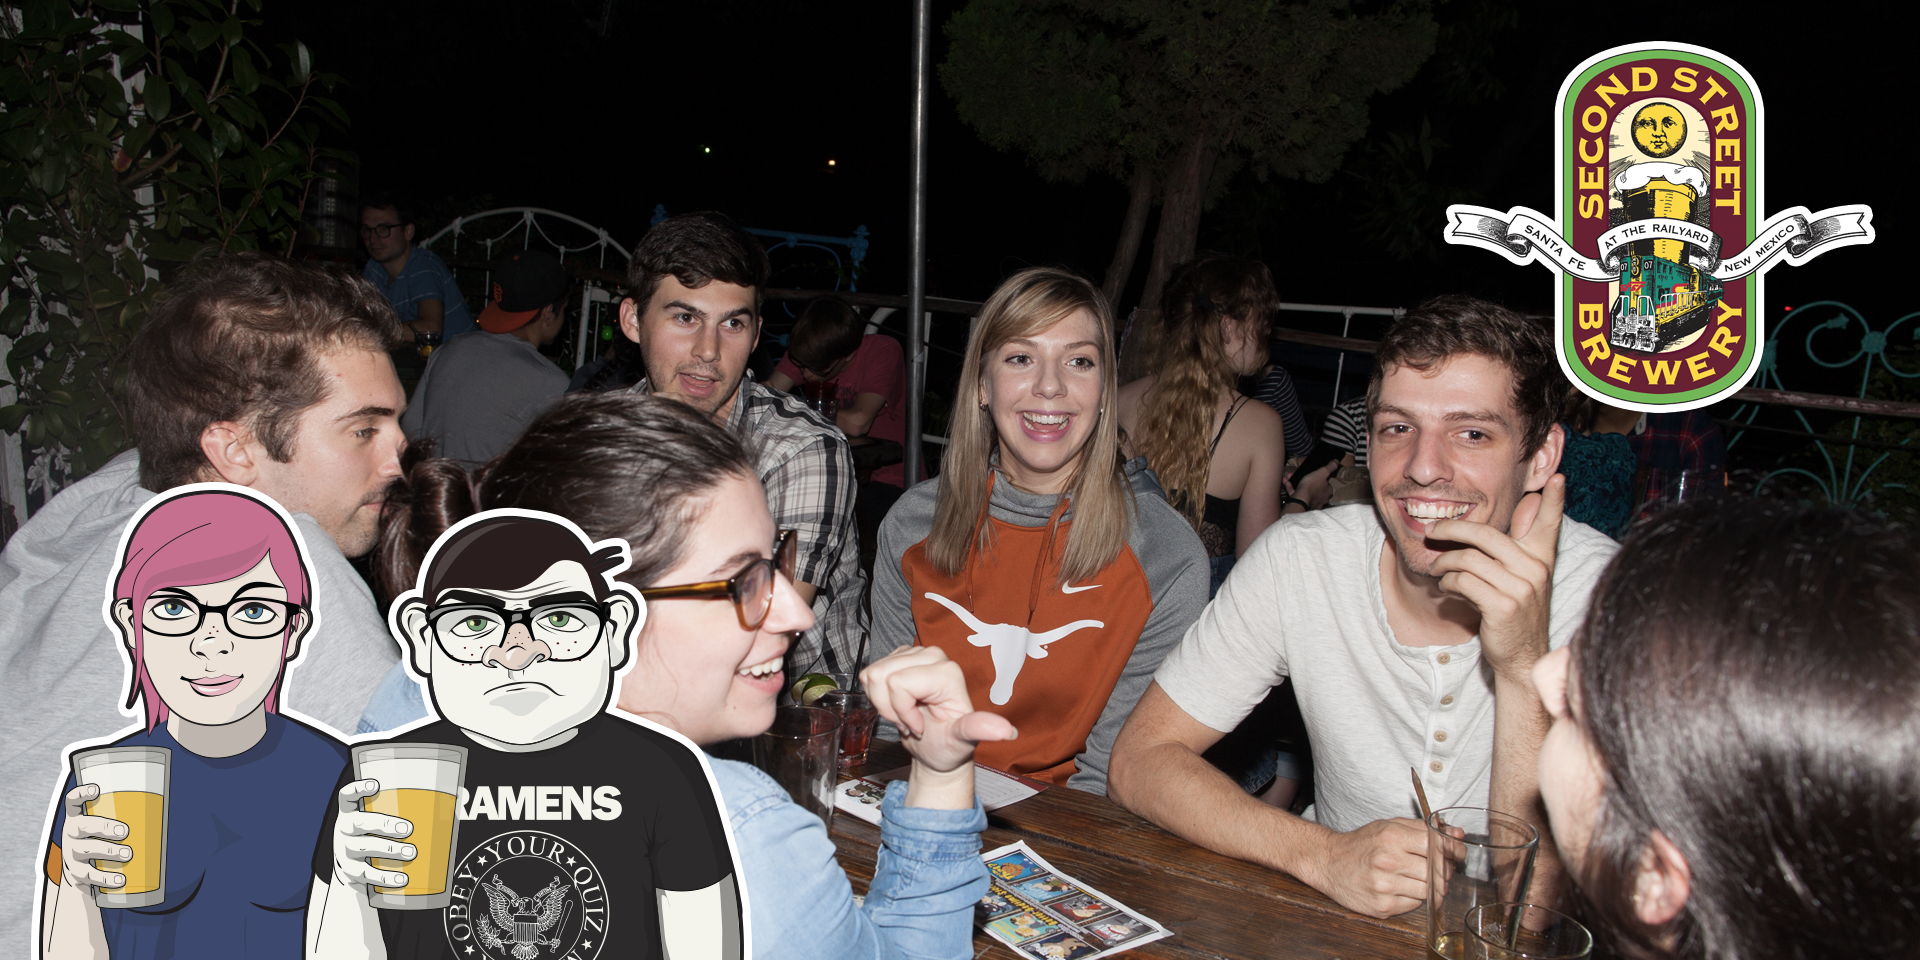 Geeks Who Drink Trivia Night at Second Street Brewery (at The Railyard) promotional image